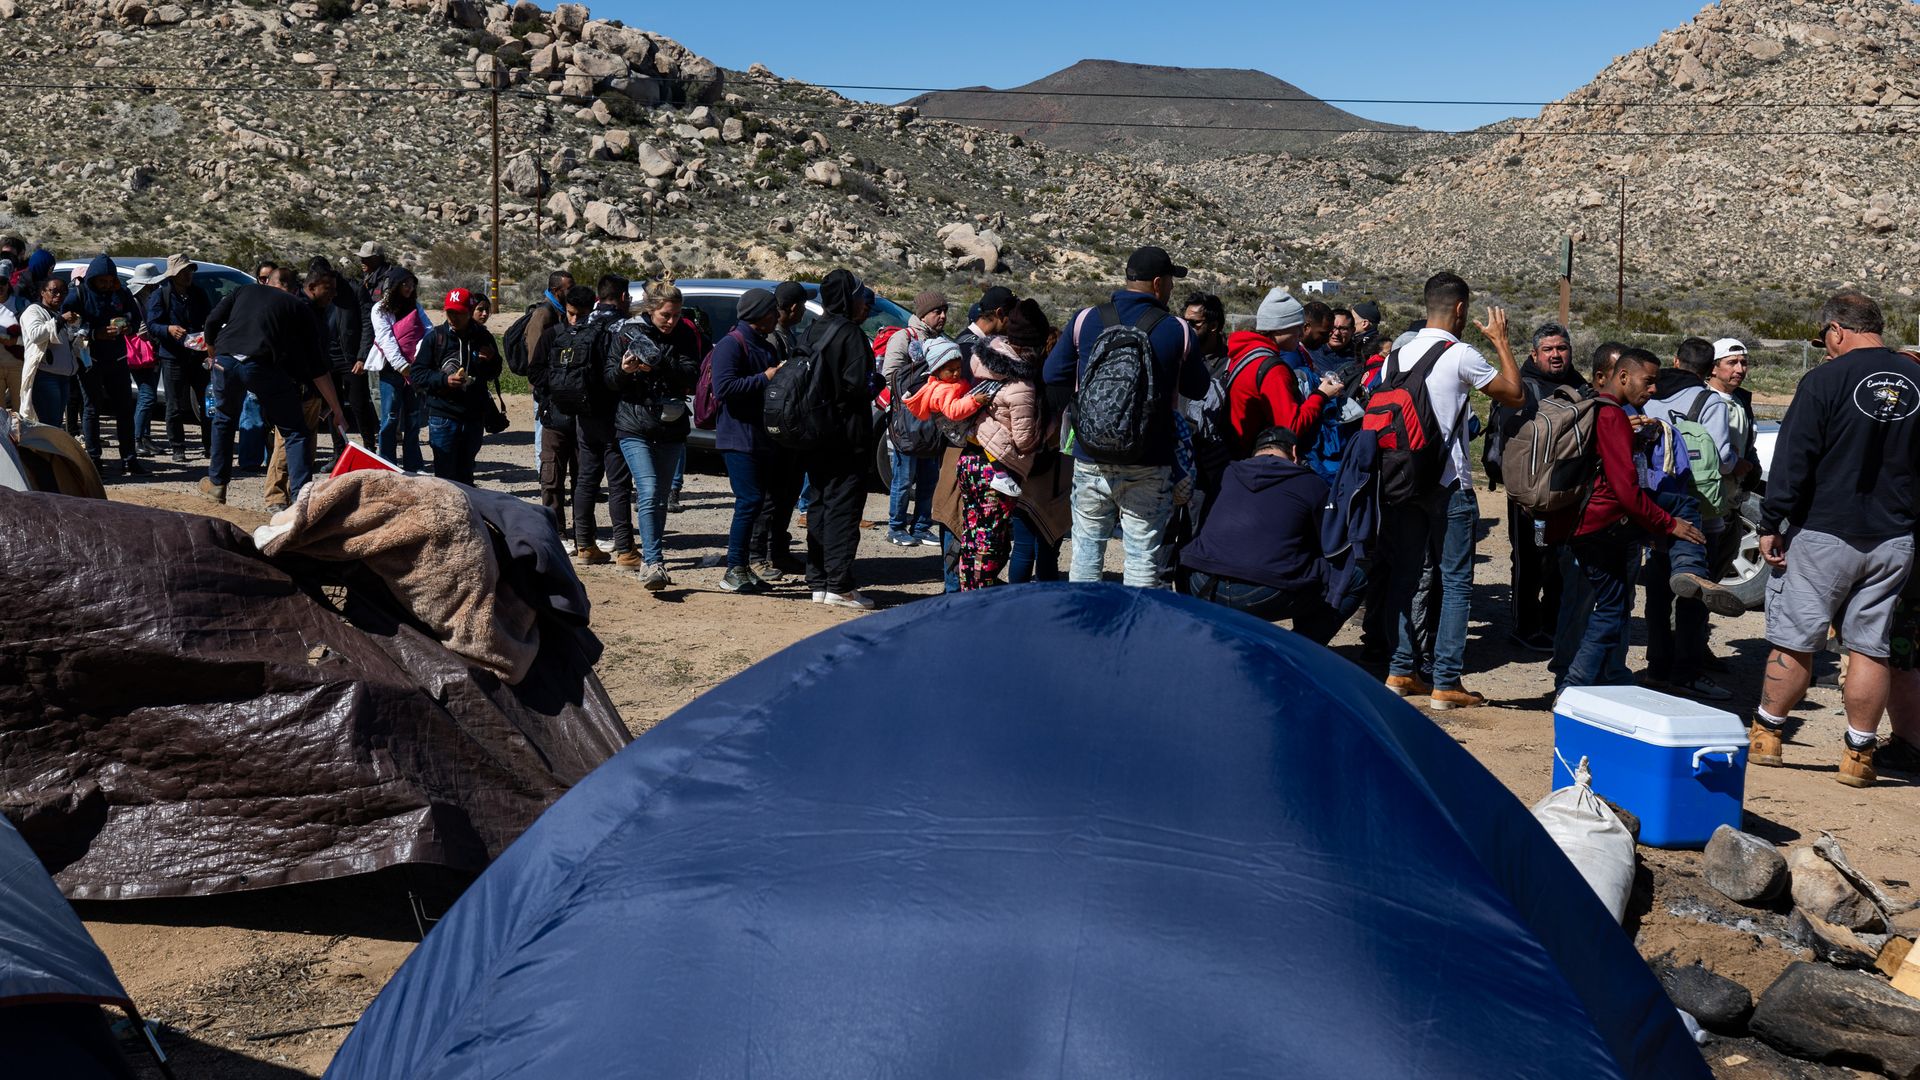 Migrants arrive at a makeshift camp after crossing the nearby border with Mexico near the Jacumba Hot Springs 